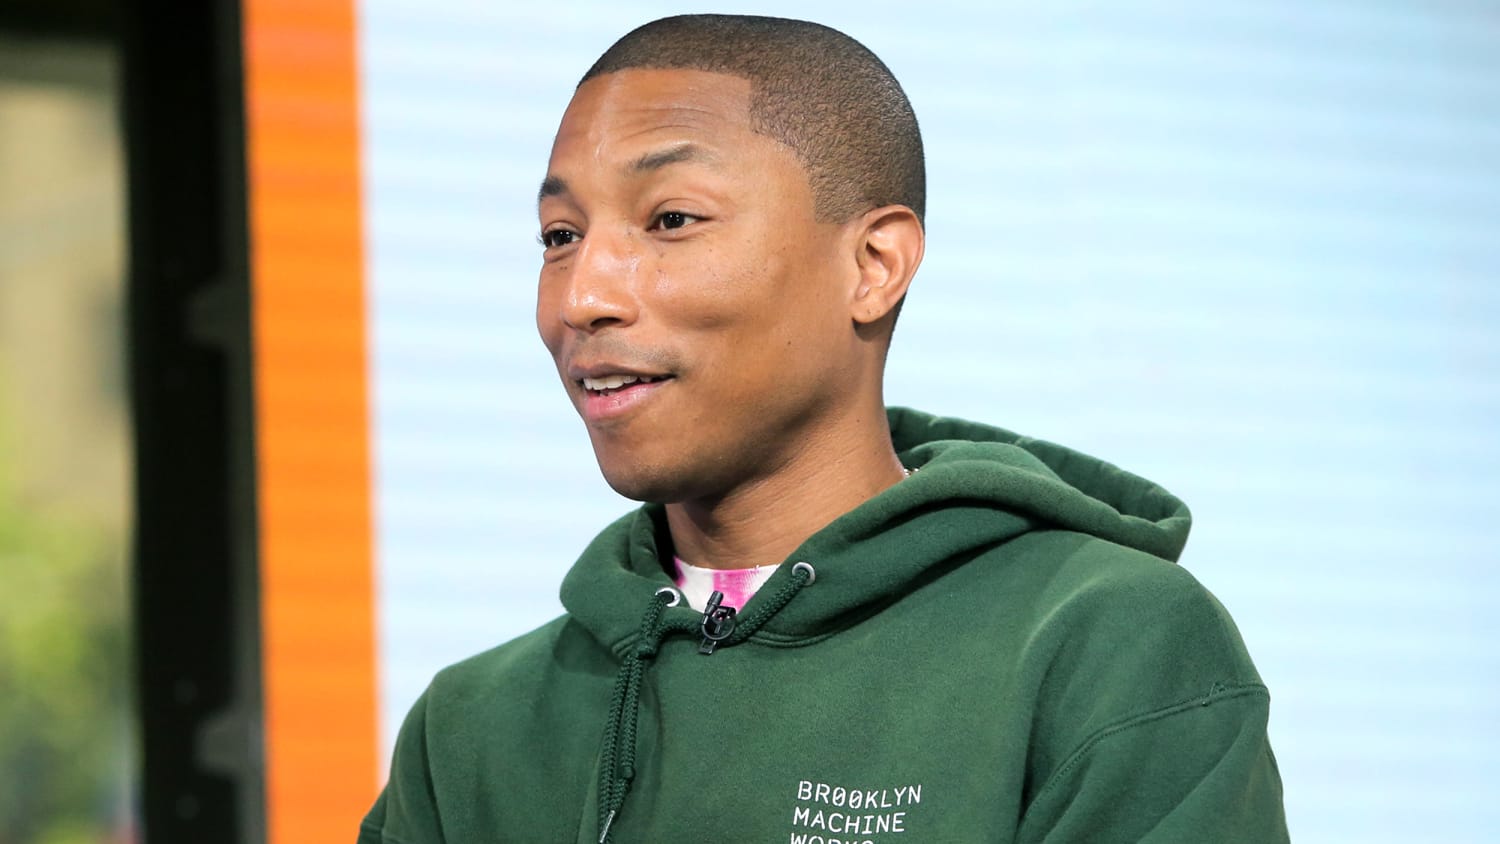 What are Pharrell Williams' triplets names, when were they born